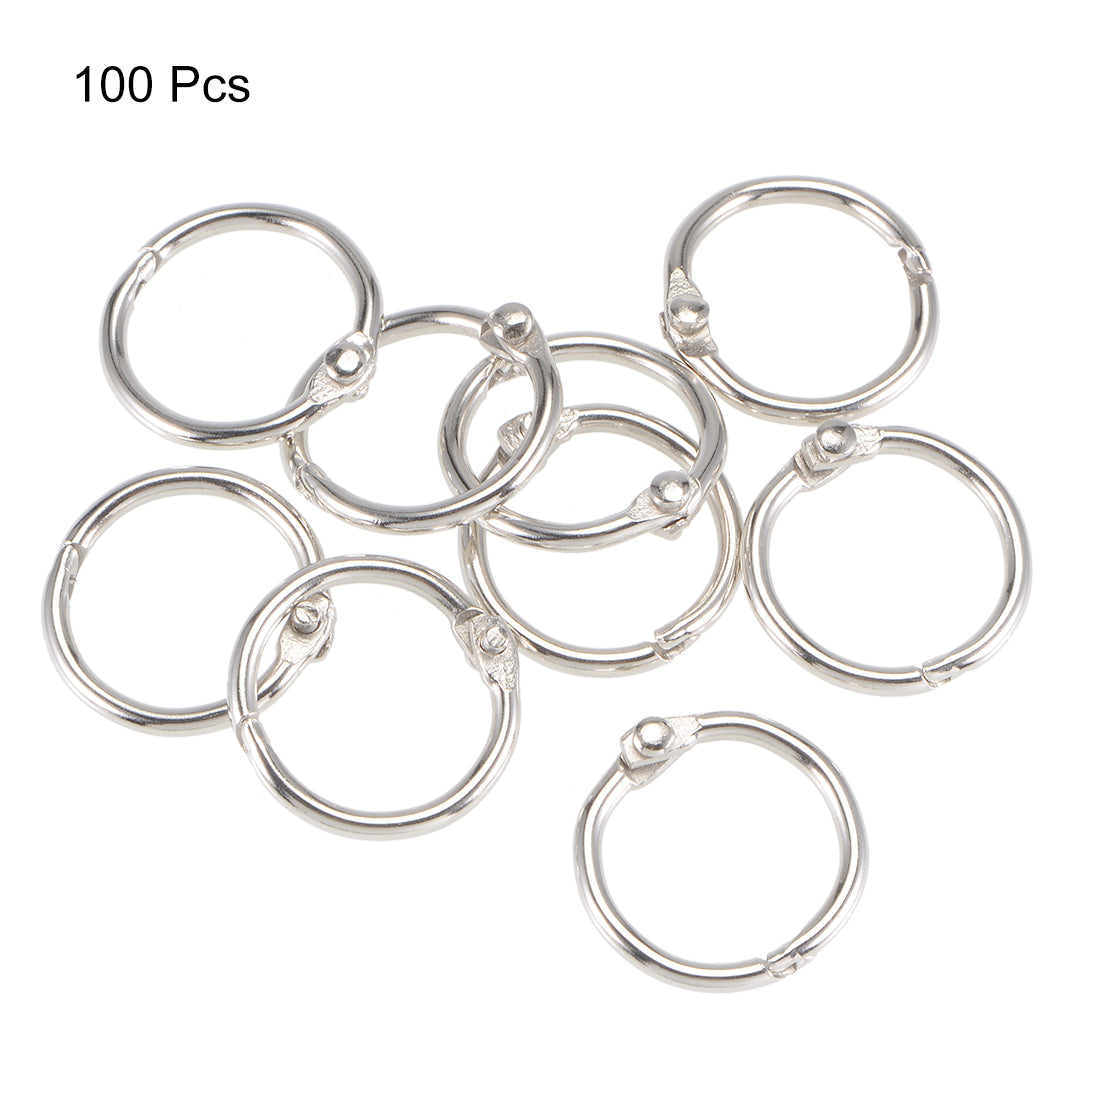 Uxcell Uxcell Binder Rings 20mm Open Jump Connector for Lanyard Zipper Handbag, Nickel Plated Iron, Pack of 100